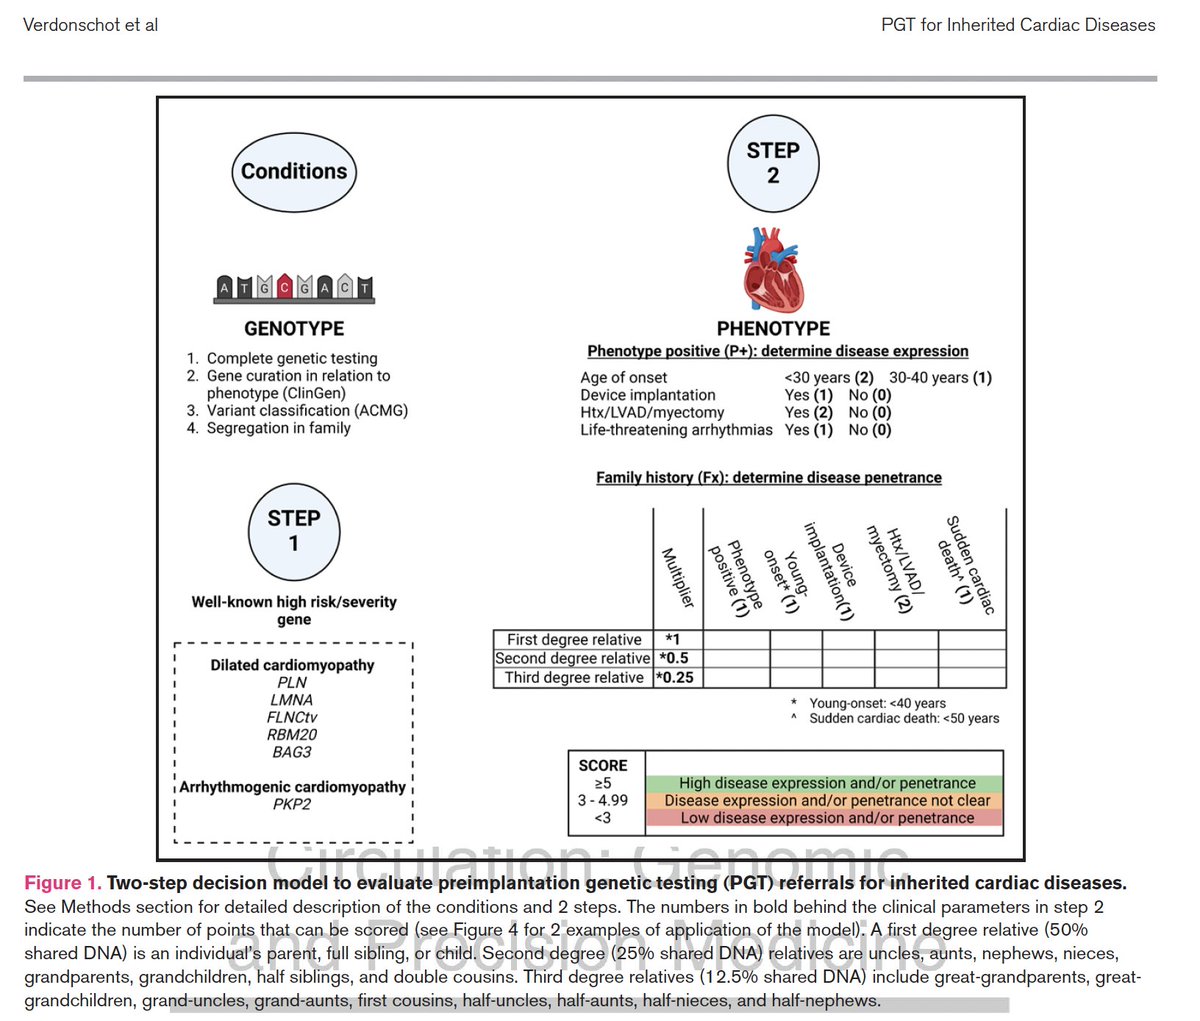 Clinical Guideline for Preimplantation Genetic Testing in Inherited Cardiac Diseases @Circ_Gen ahajournals.org/doi/abs/10.116…